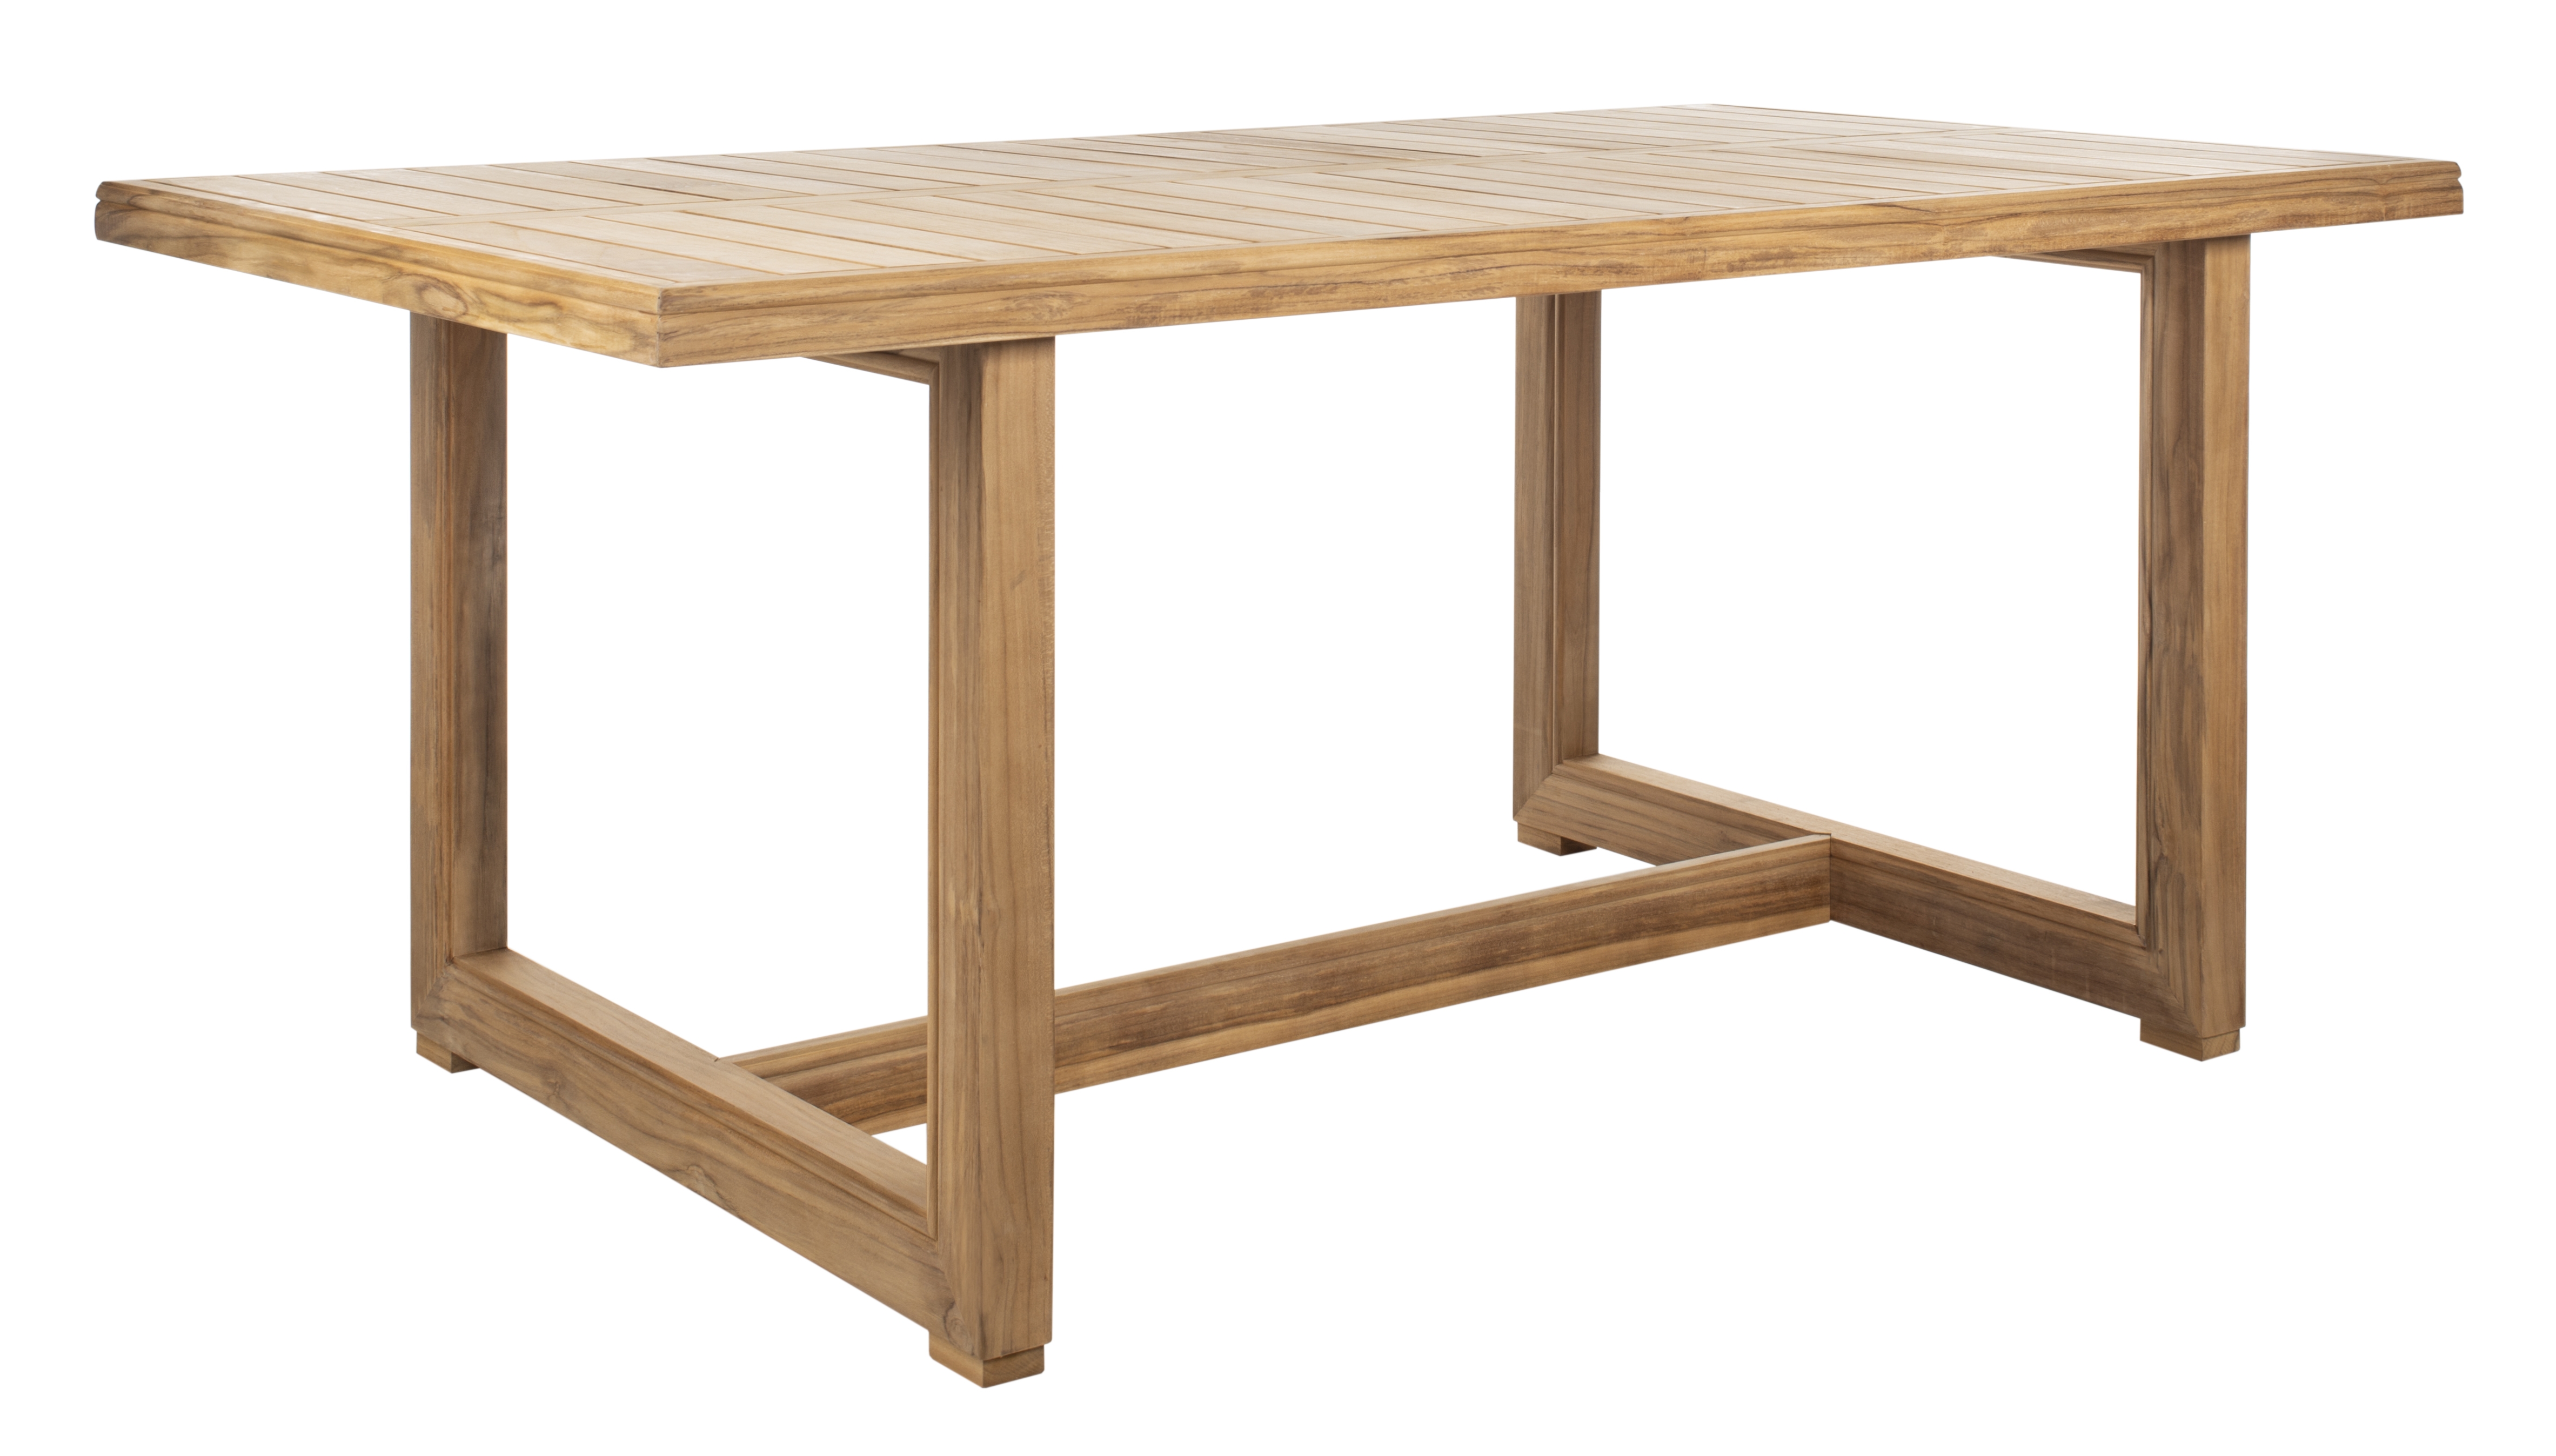 Montford Dining Table - Natural - Arlo Home - Image 1